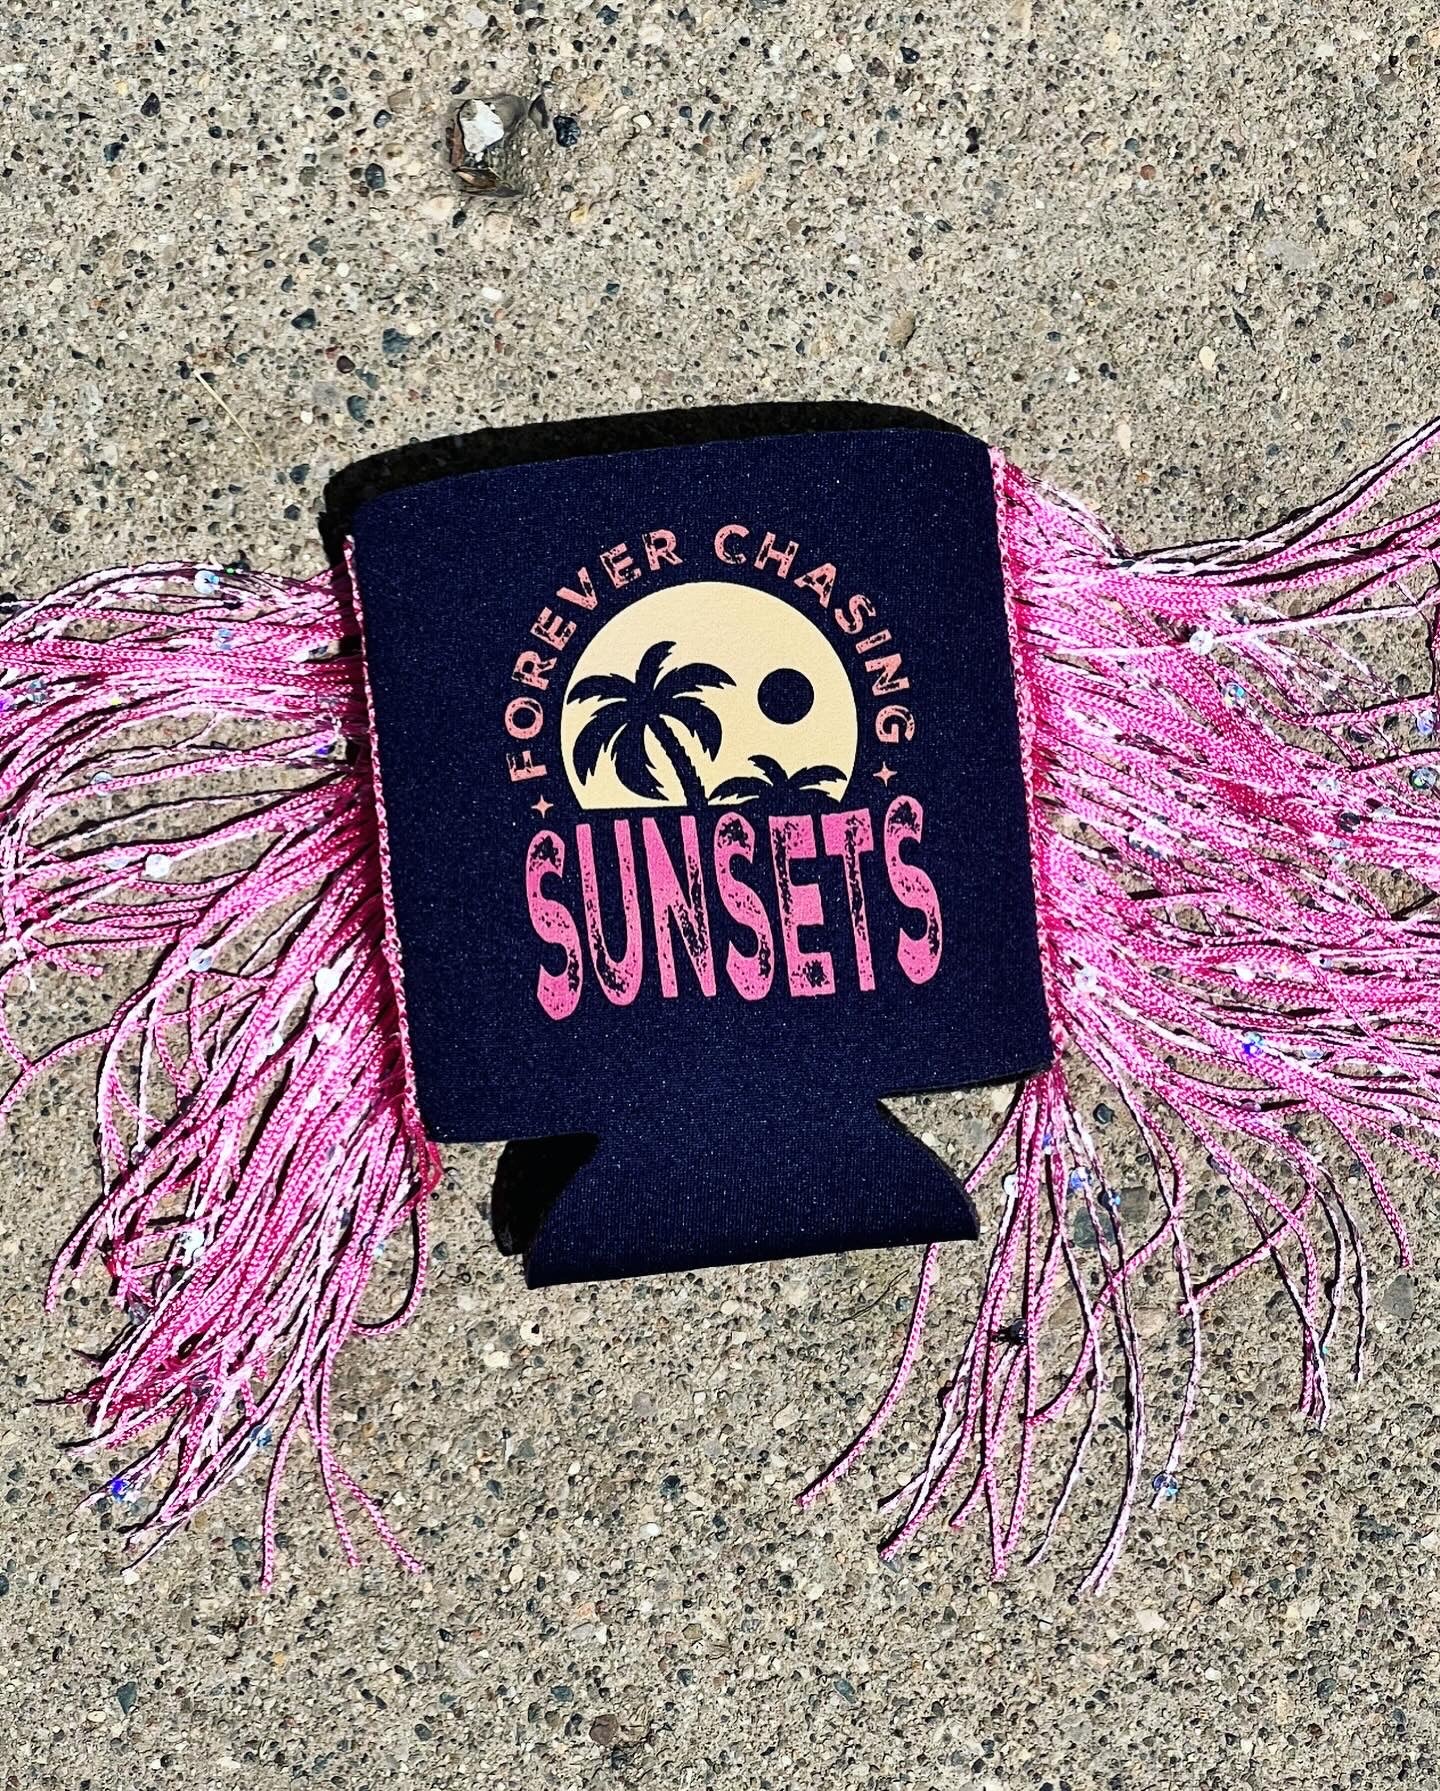 Chasing Sunsets coozie